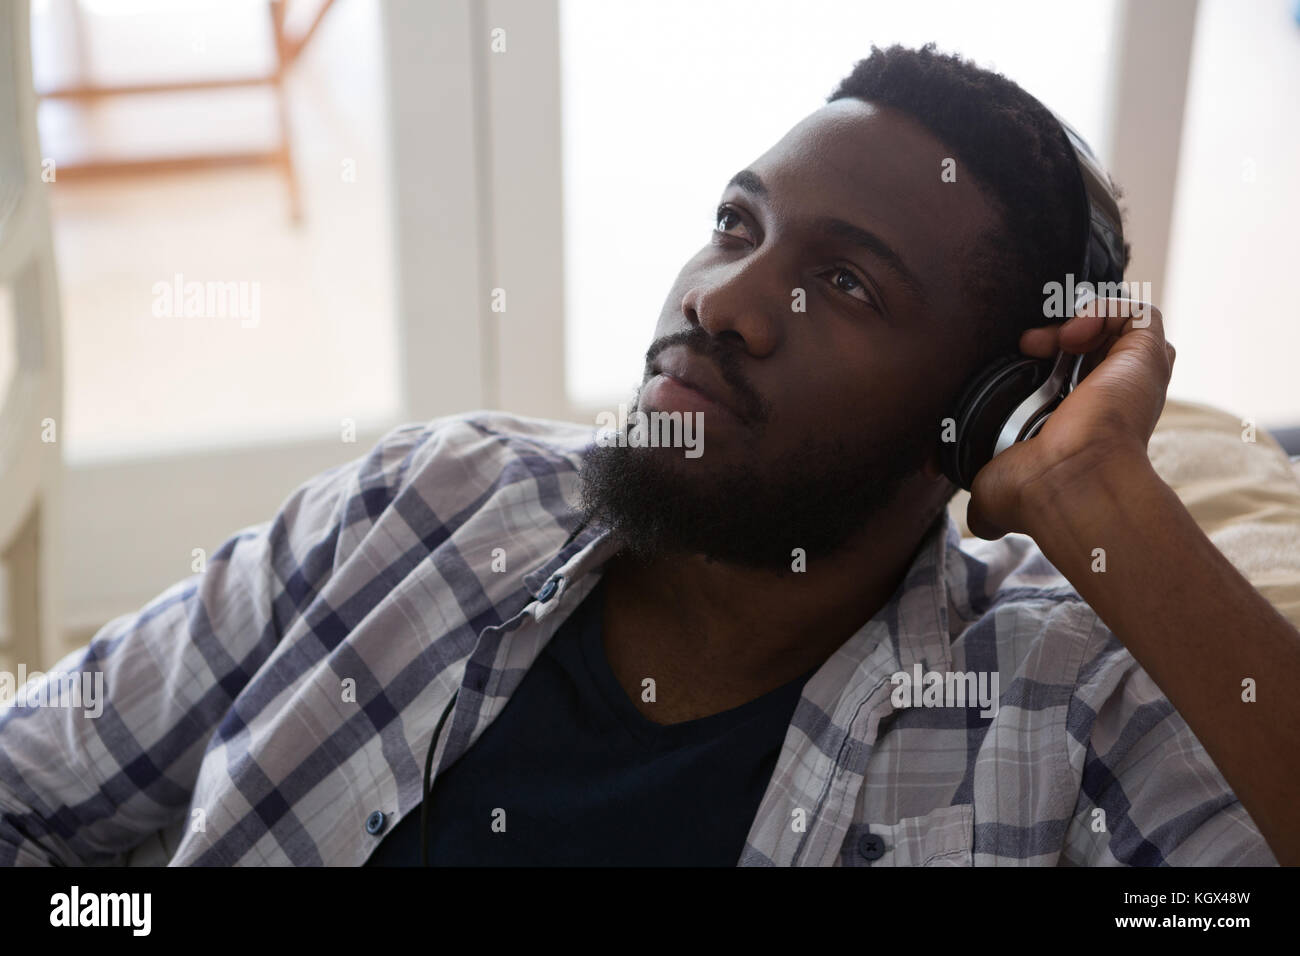 Thoughtful man listening to music on headphones at home Stock Photo